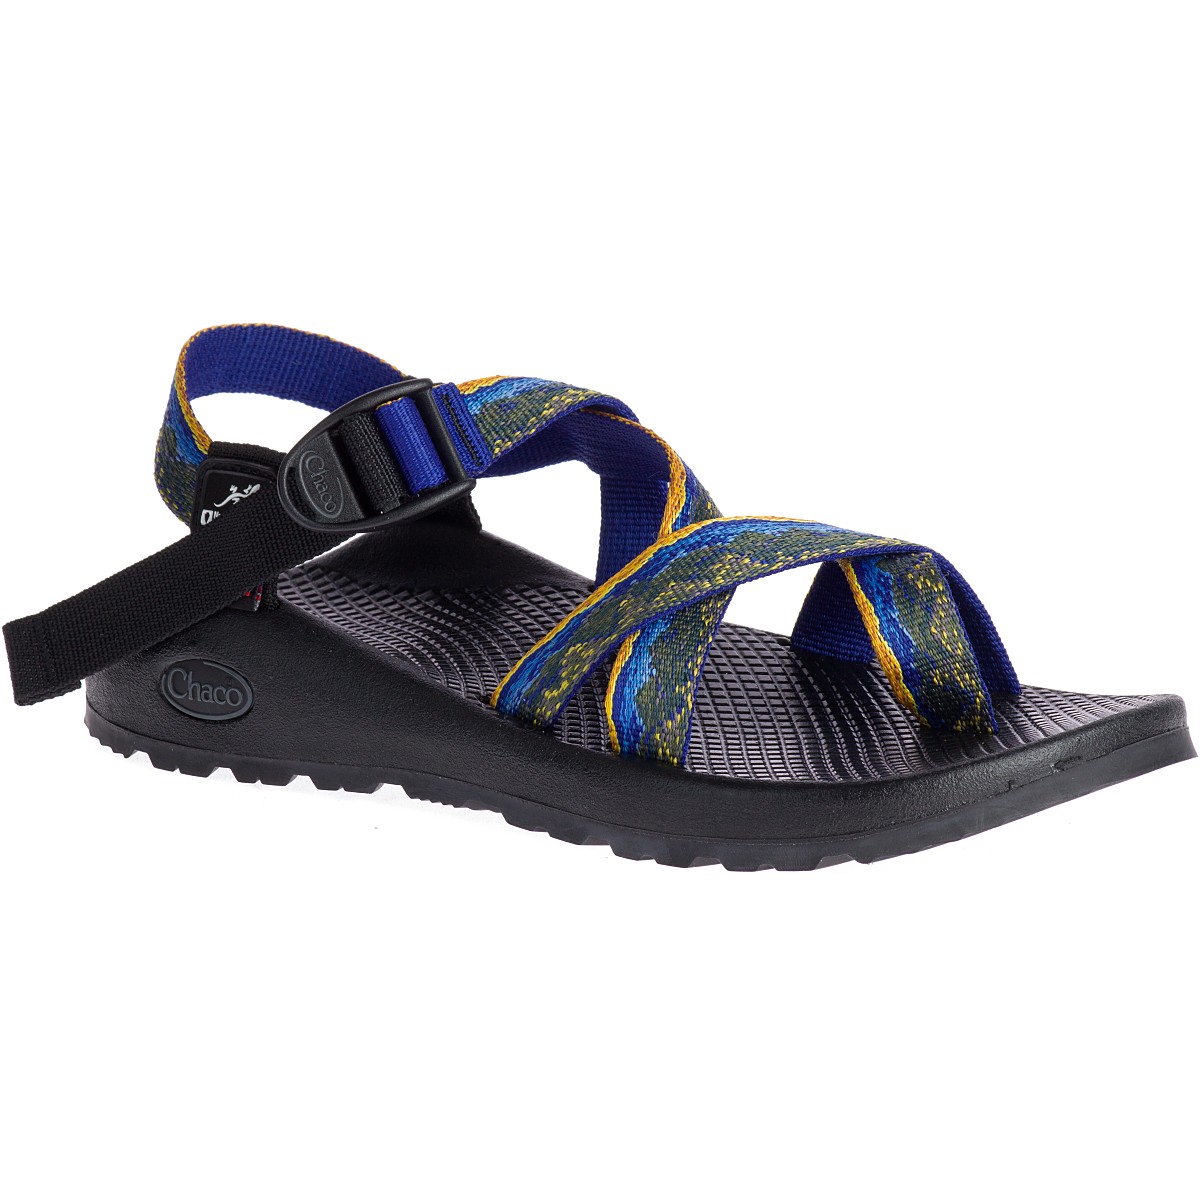 sandals comparable to chacos